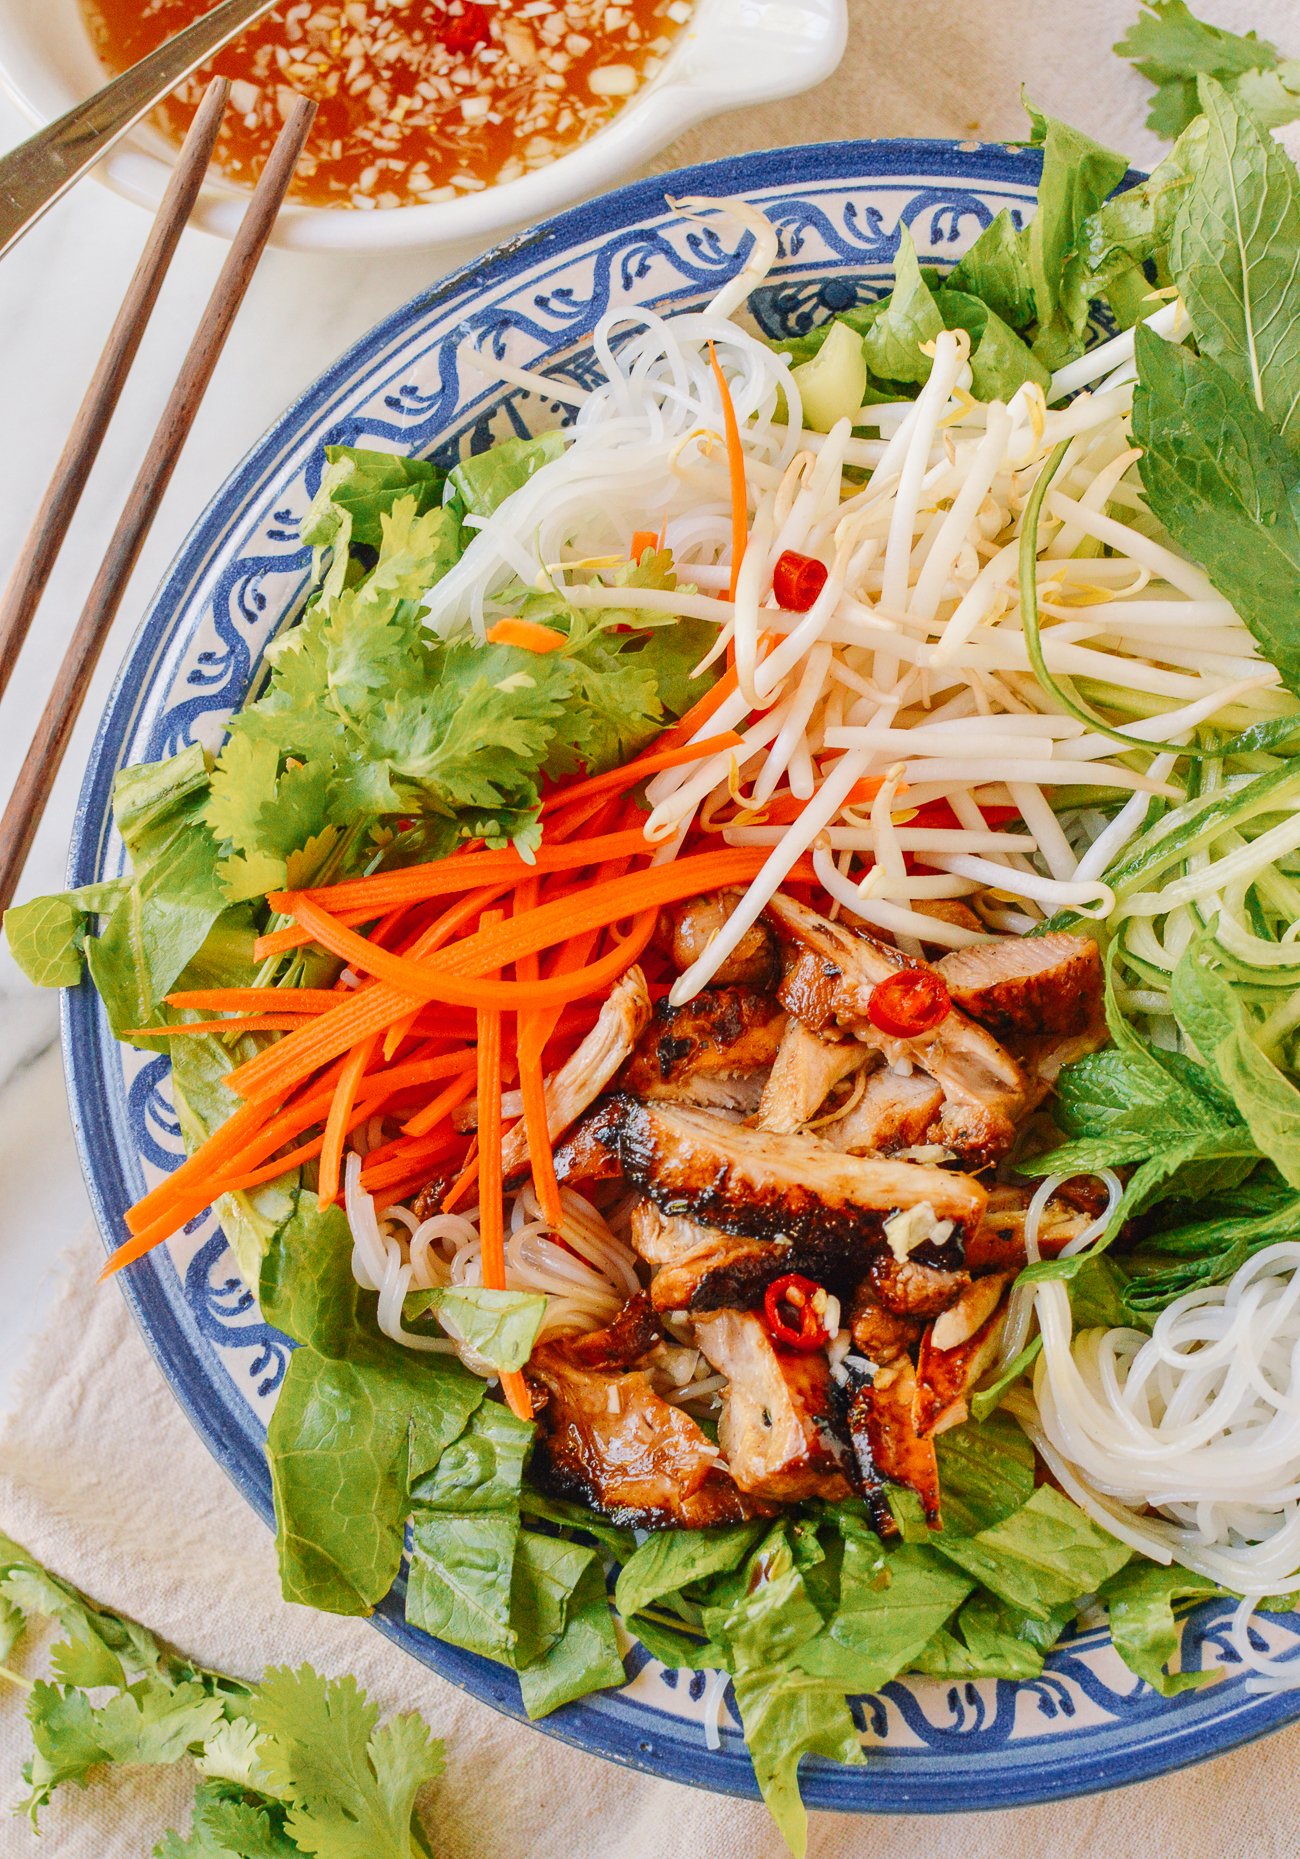 Vietnamese noodle salad with bean sprout, carrot, mint, grilled chicken, nuoc cham